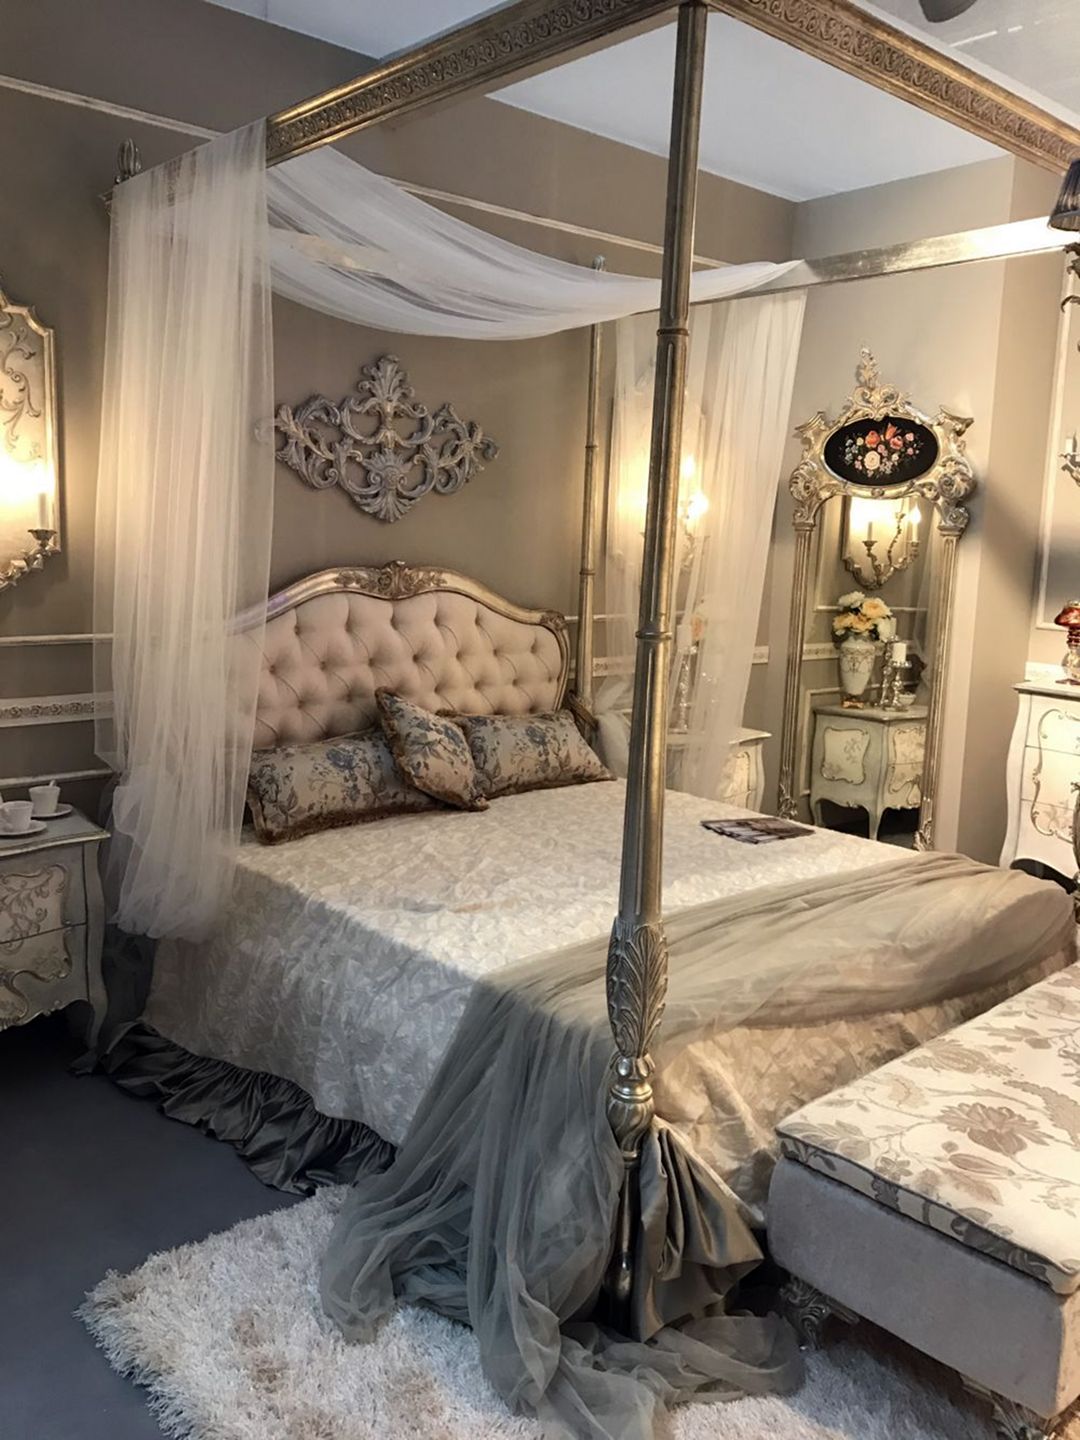 Large Canopy Bed For A Baroque Bedroom From Homedit